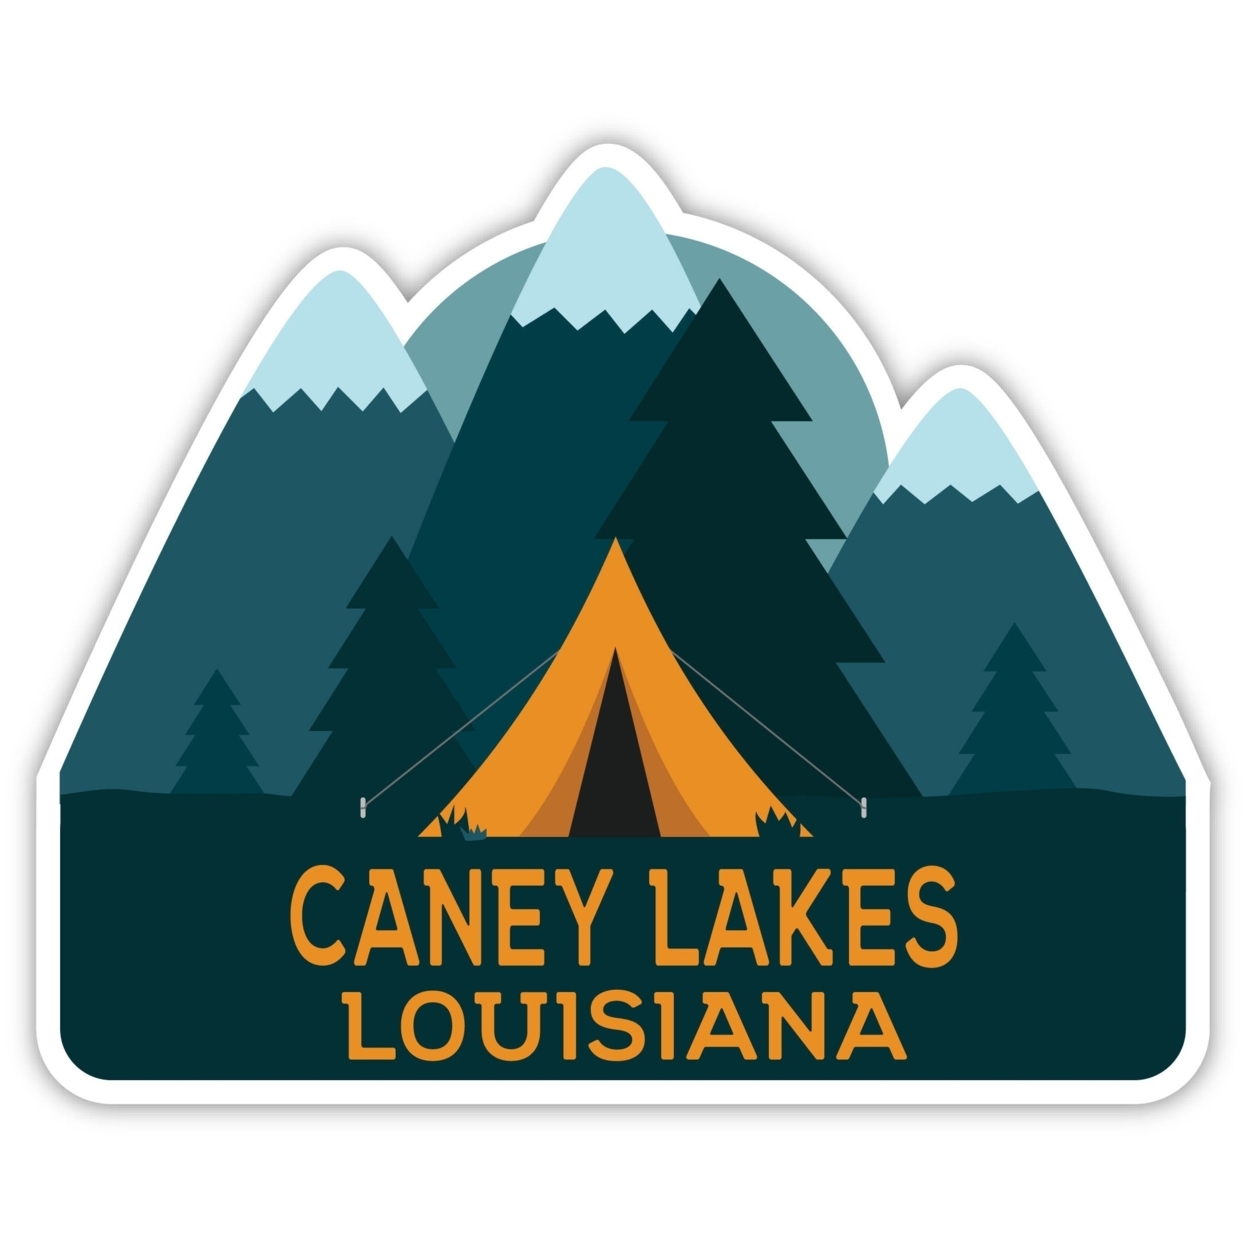 Caney Lakes Louisiana Souvenir Decorative Stickers (Choose Theme And Size) - 4-Pack, 10-Inch, Tent